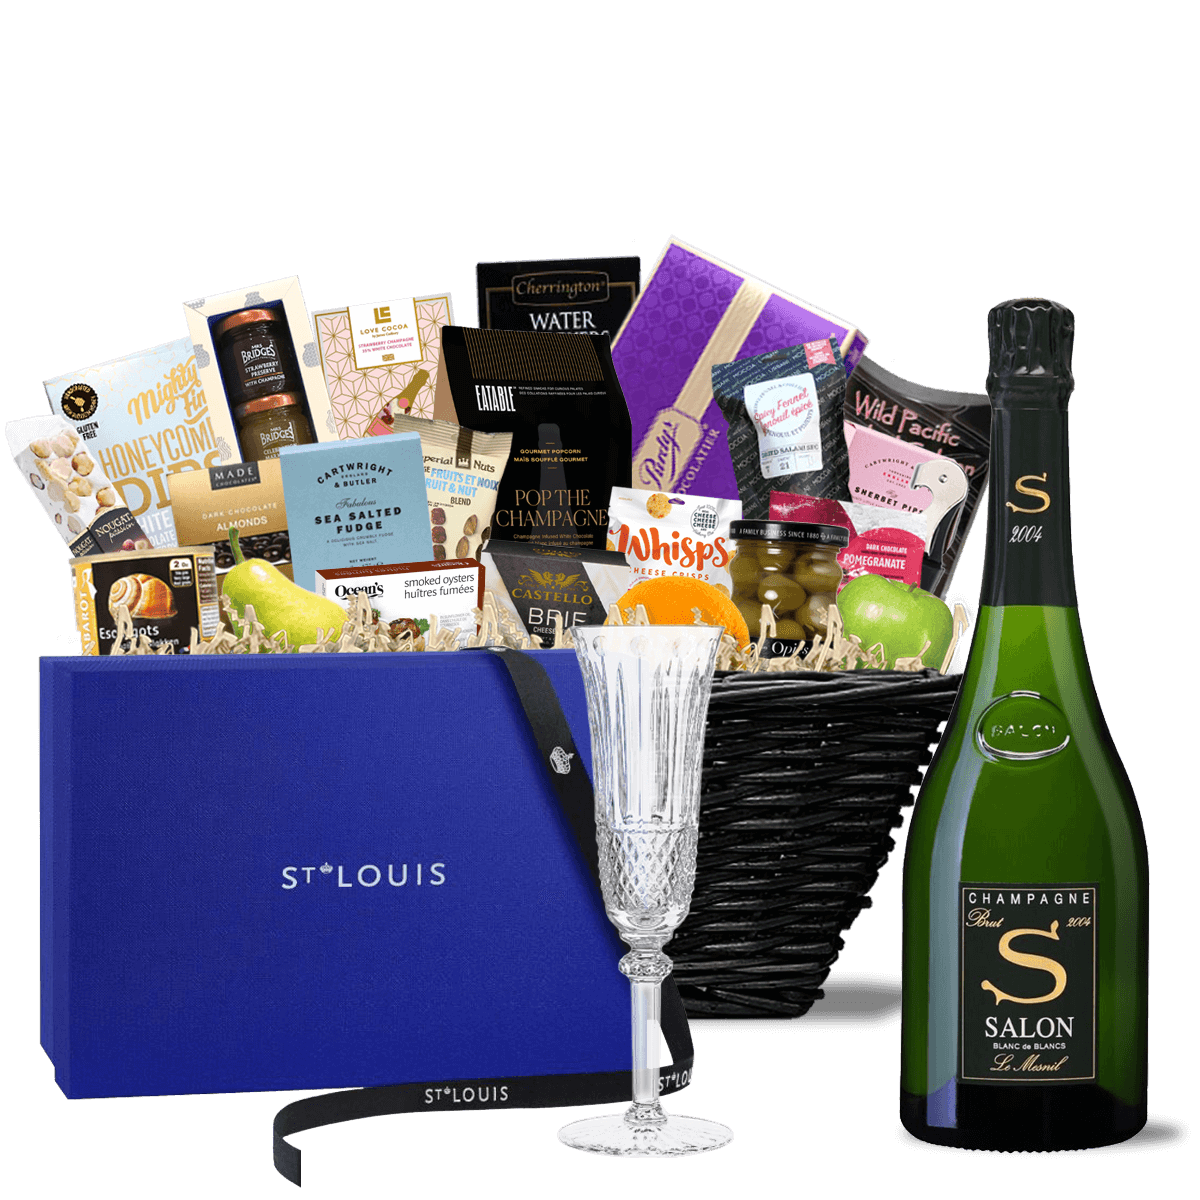 TAG Liquor Stores BC - Salon Le Mesnil Champagne 2004 Ultra Luxe Gift Basket